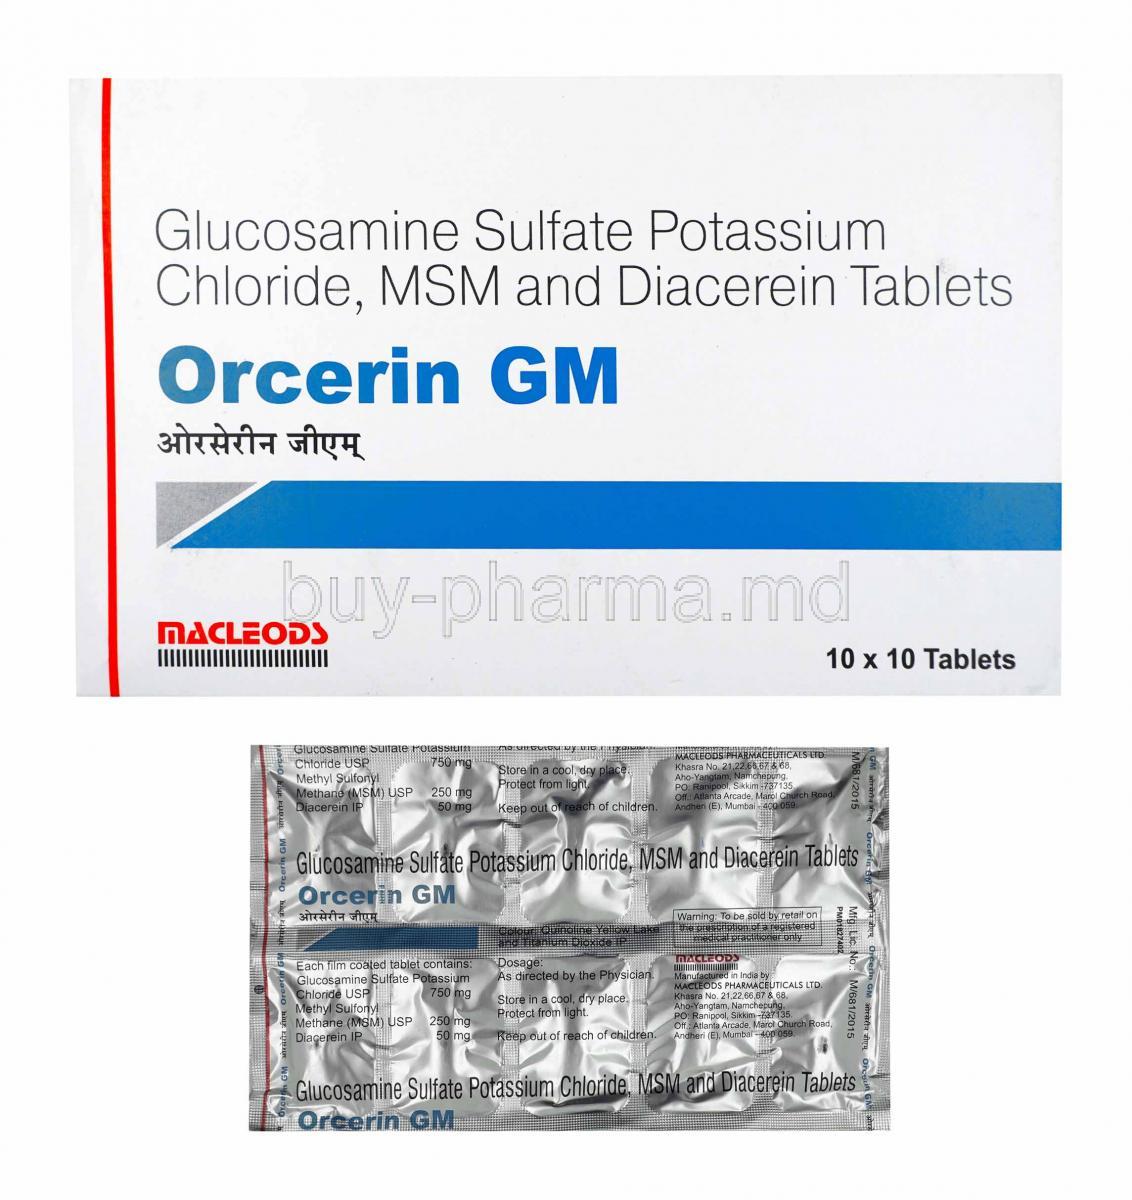 Orcerin GM, Glucosamine, Diacerein and Methyl Sulfonyl Methane box and tablets